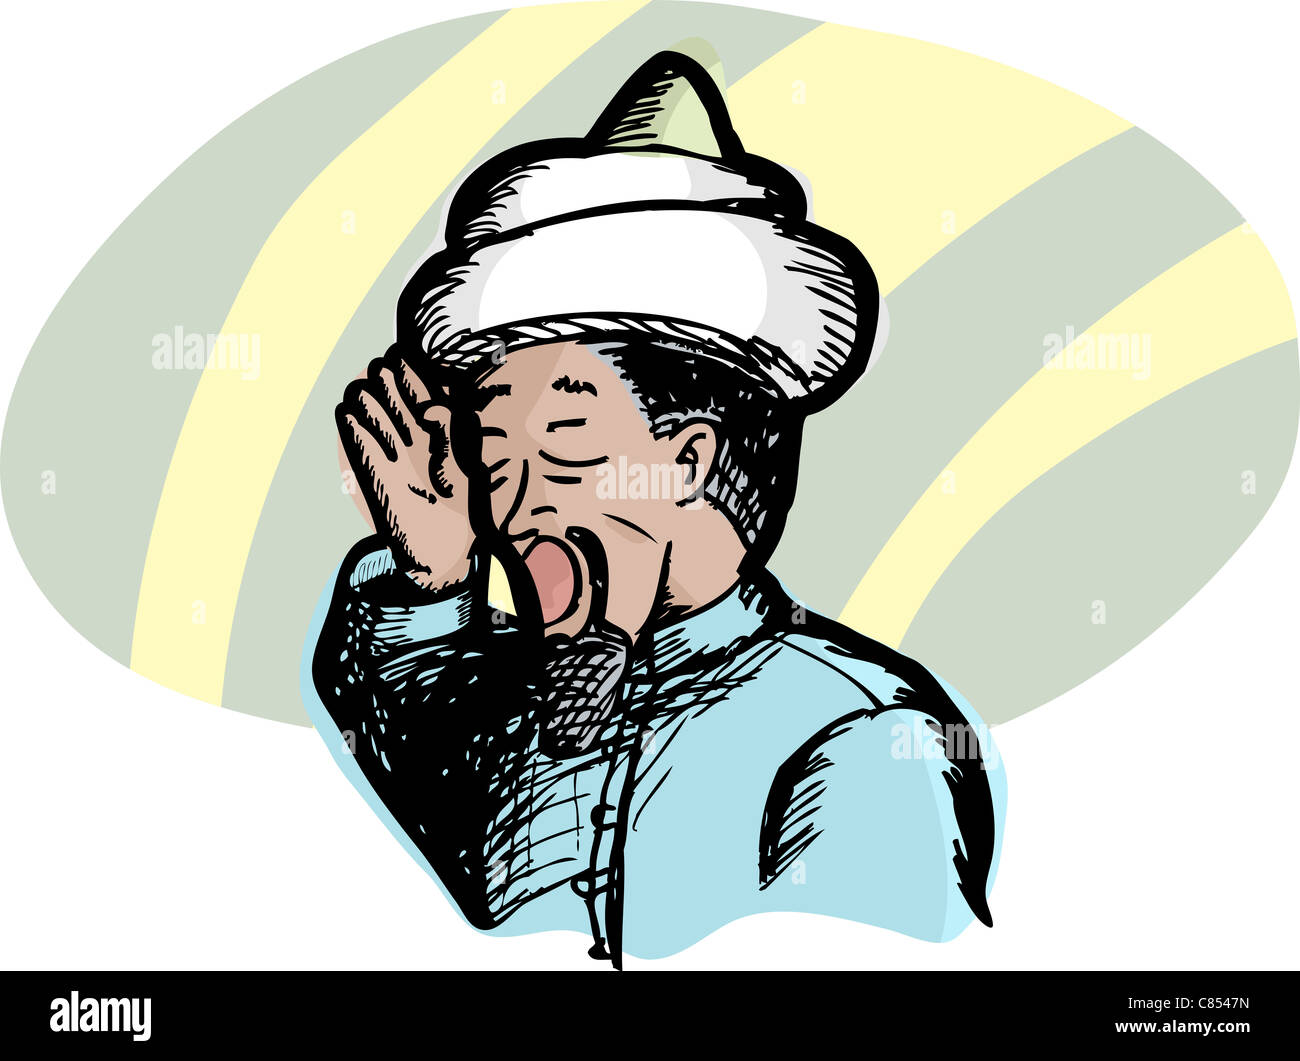 Muslim cleric raises right hand to ear as he recites the Islamic call to prayer. Stock Photo